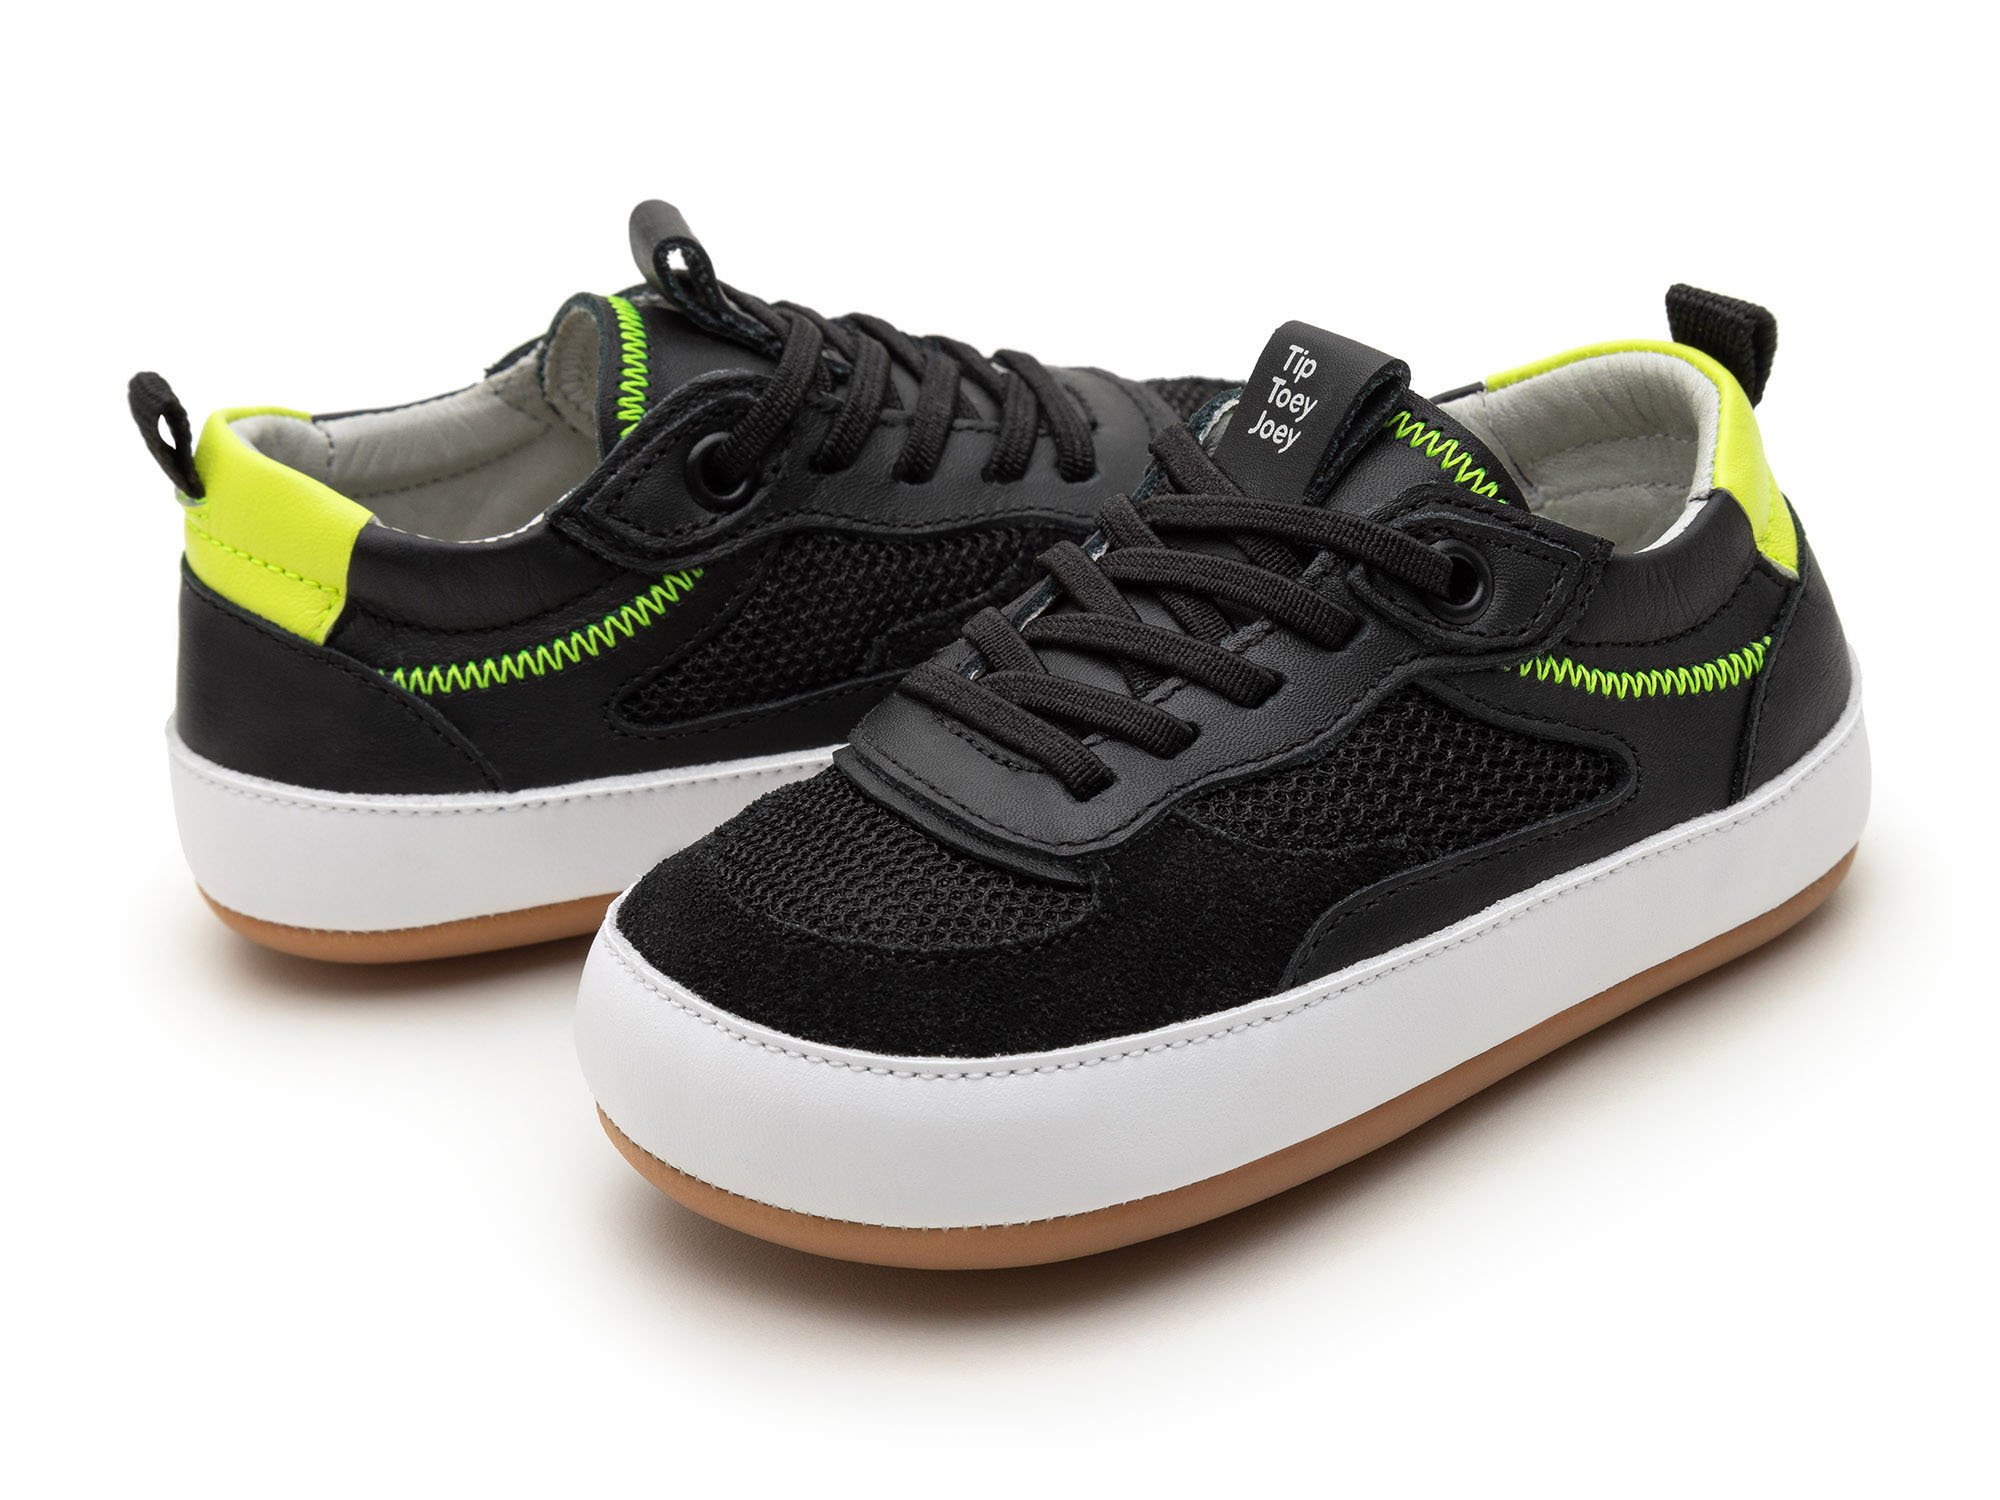 UP & GO Sneakers for Boys Step | Tip Toey Joey - Australia - 5